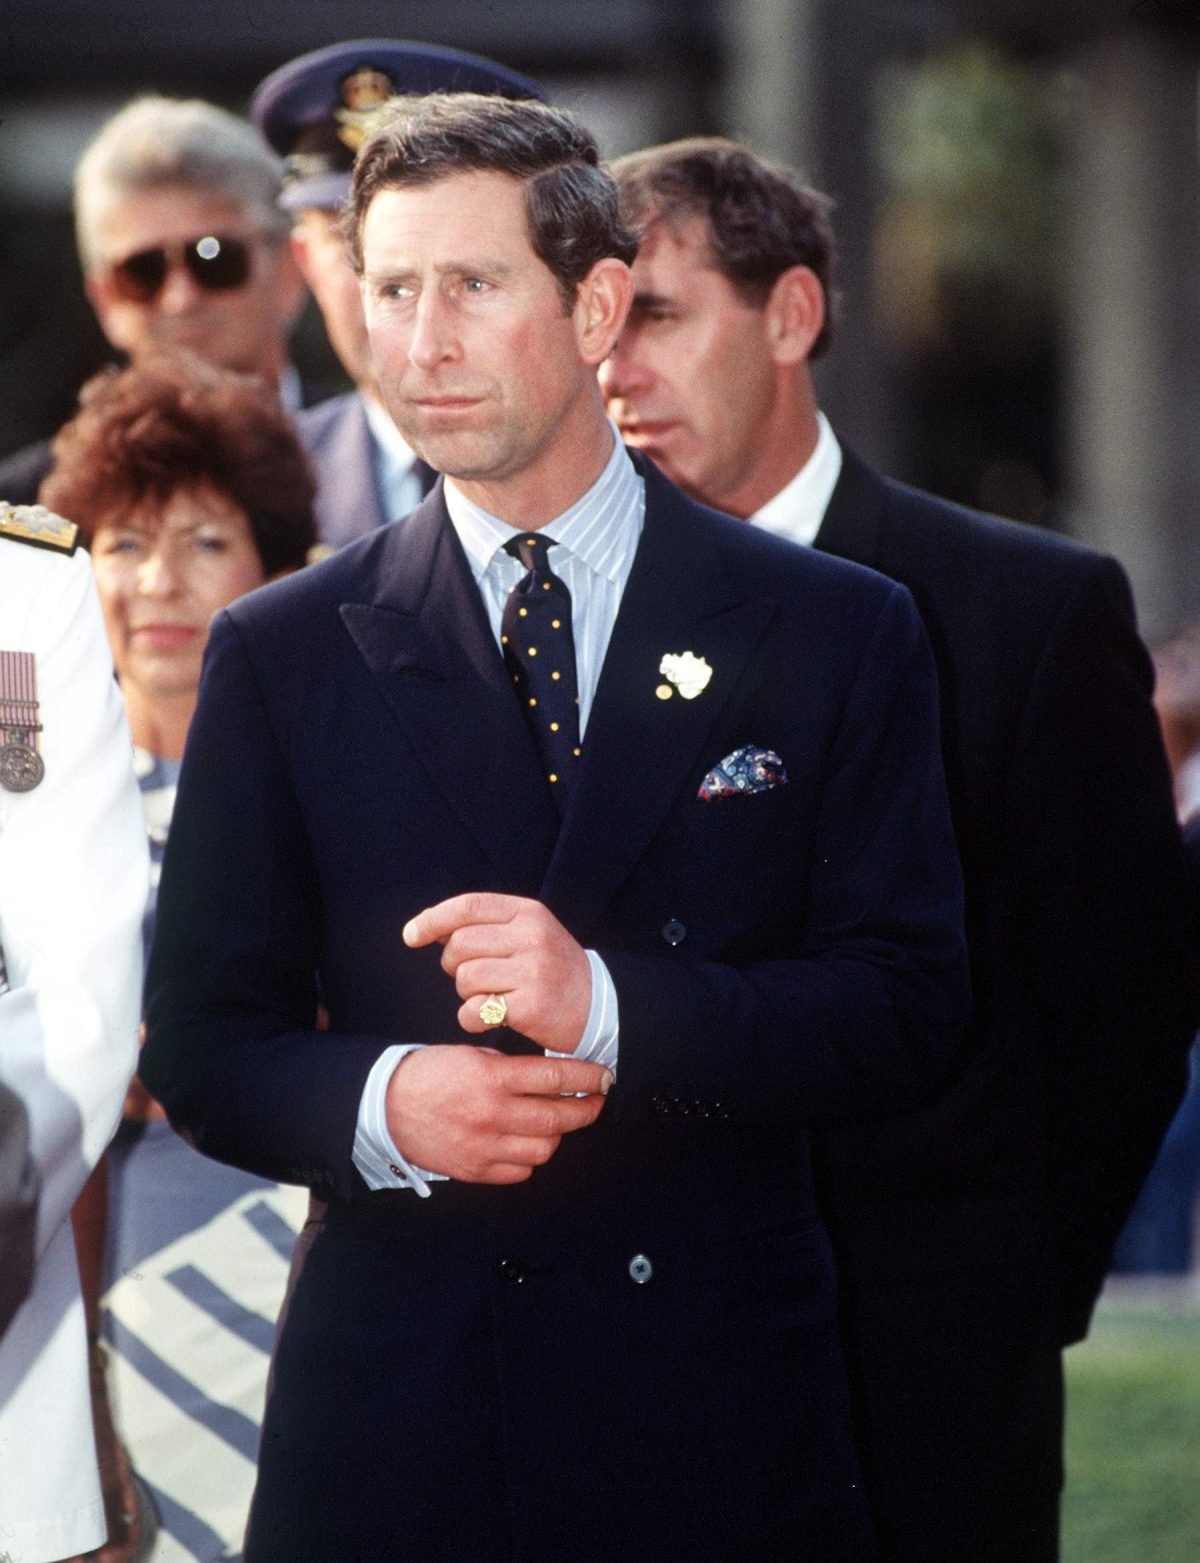 Then-Prince Charles tugging at his cufflinks during trip to Australia